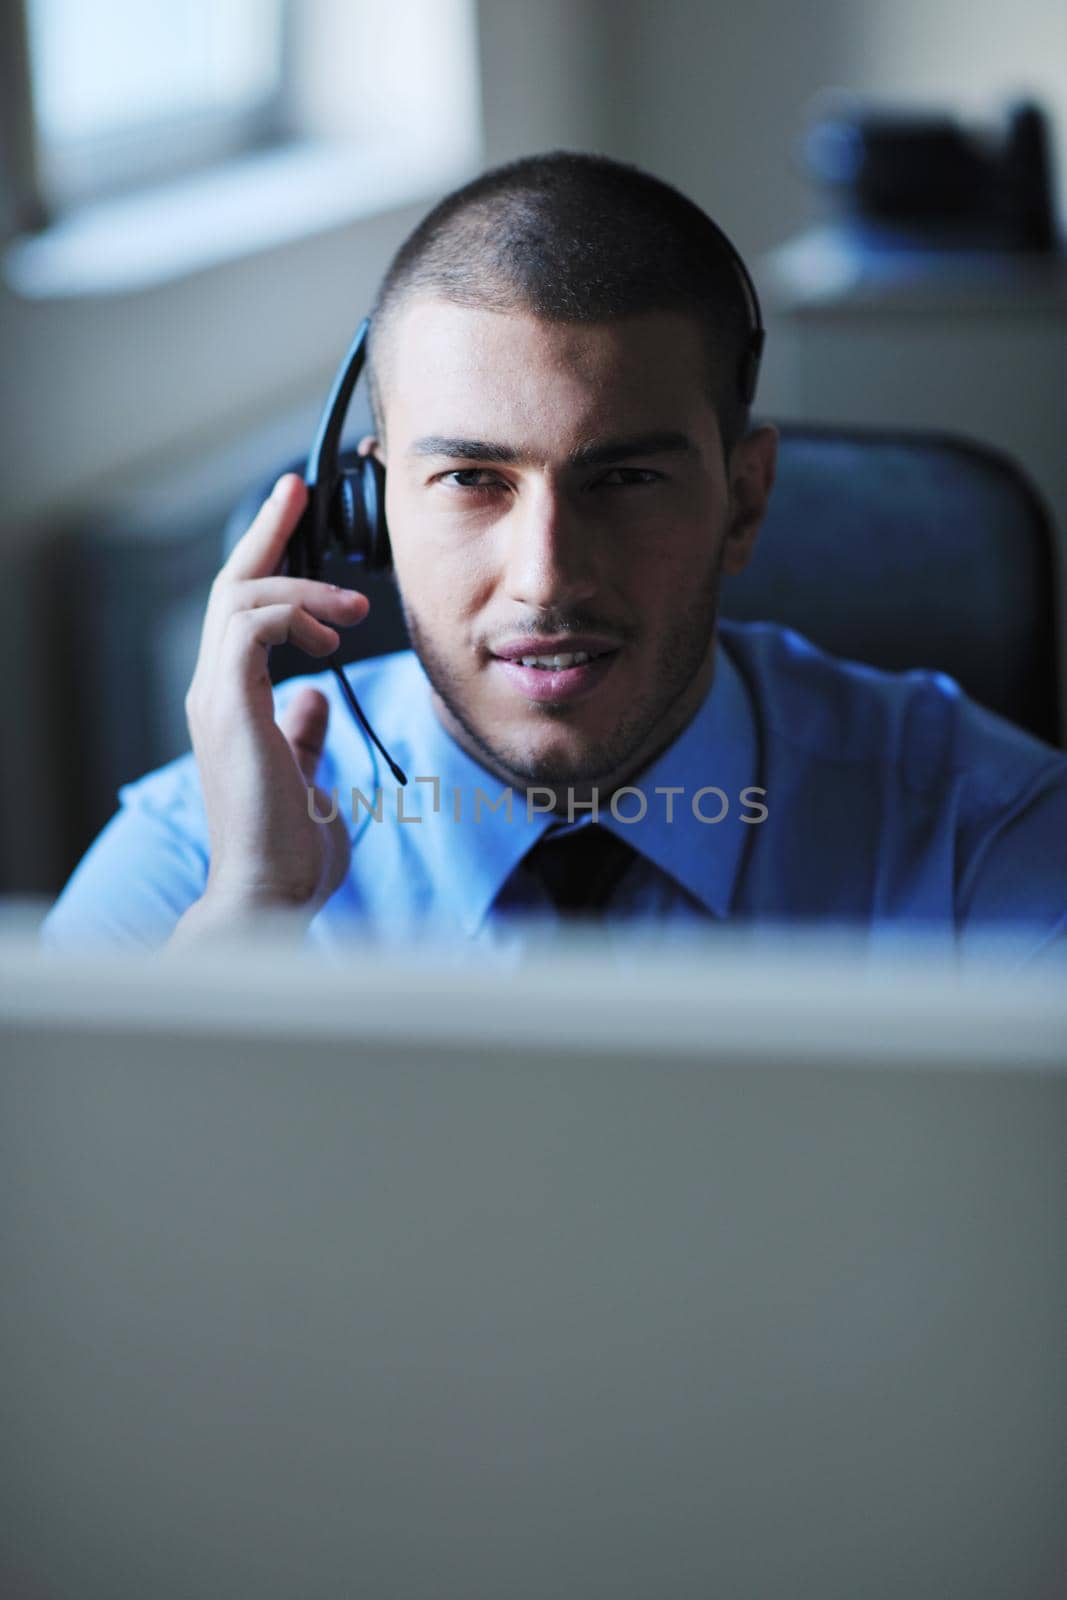 businessman with a headset portrait at bright call center helpdesk support office